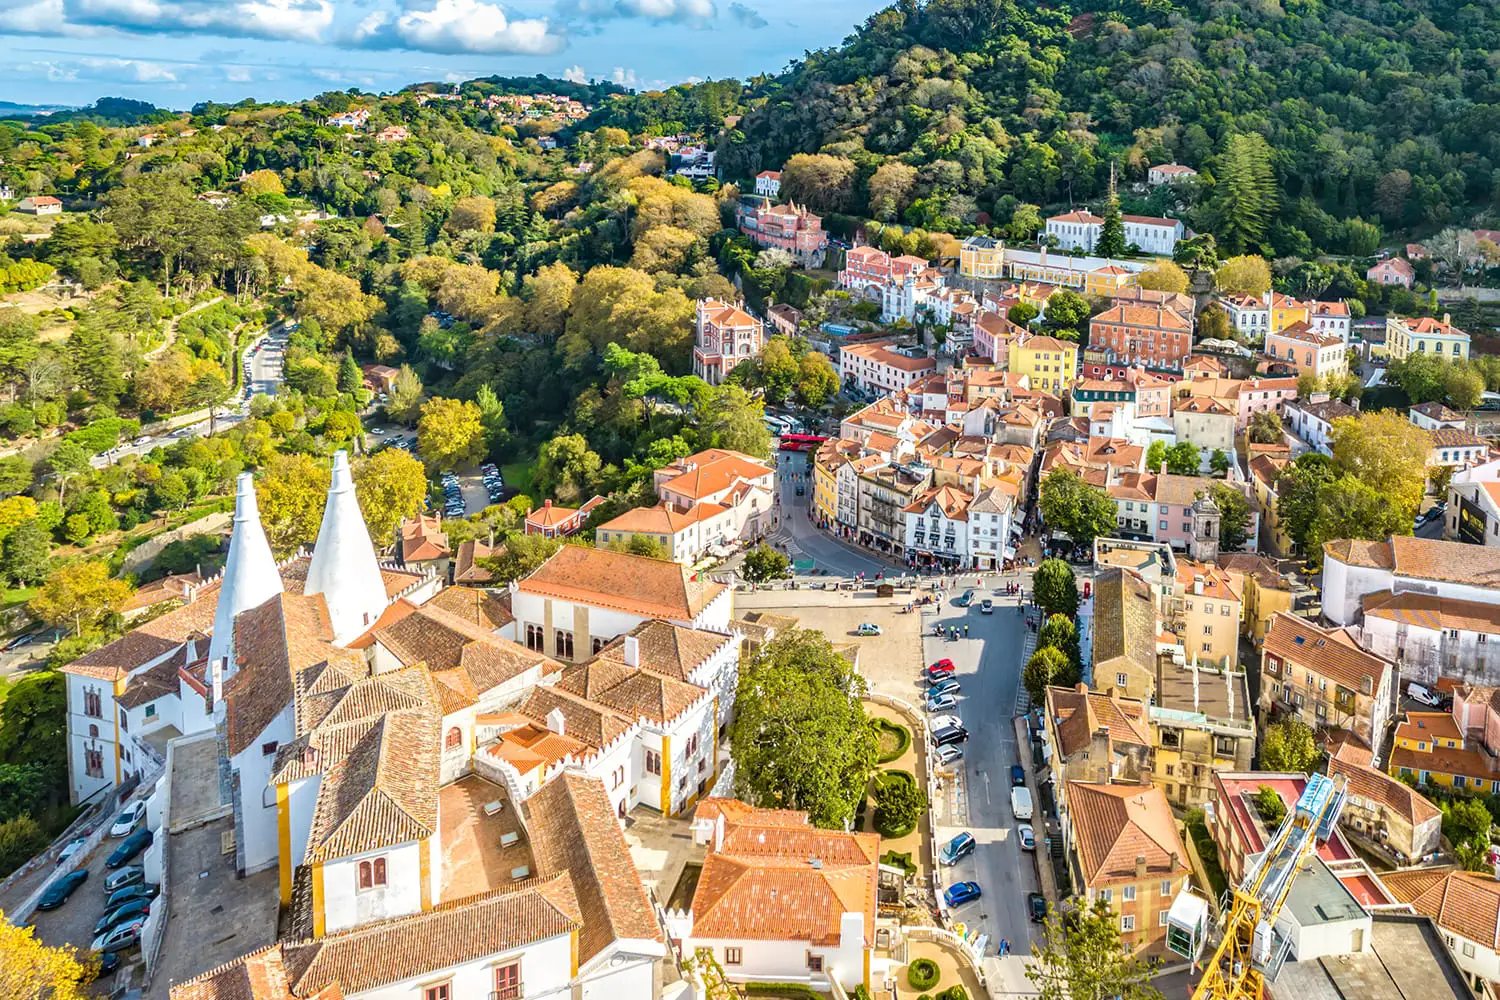 Aerial View of The Palace of Sintra, also called Sintra National Palace, in the Town of Sintra, Portugal